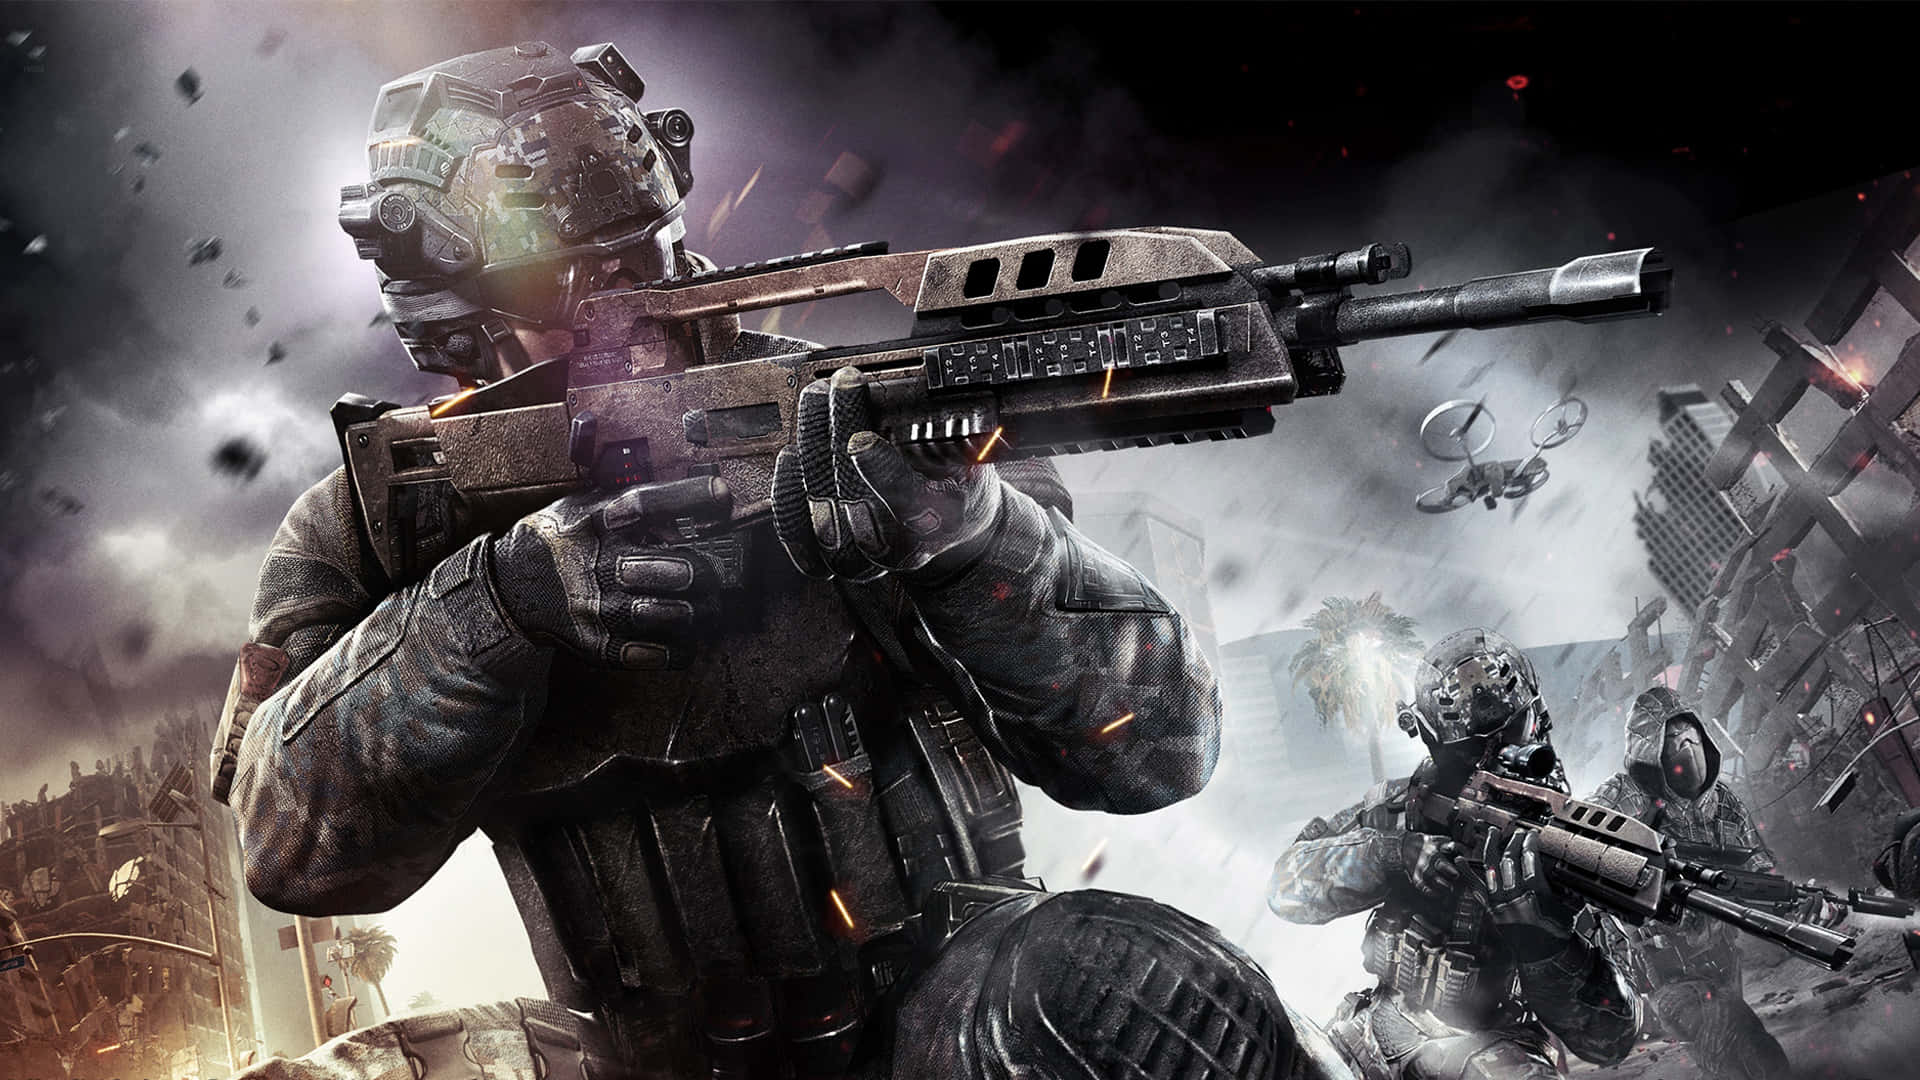 Call Of Duty Black Ops 2 Pc Wallpaper